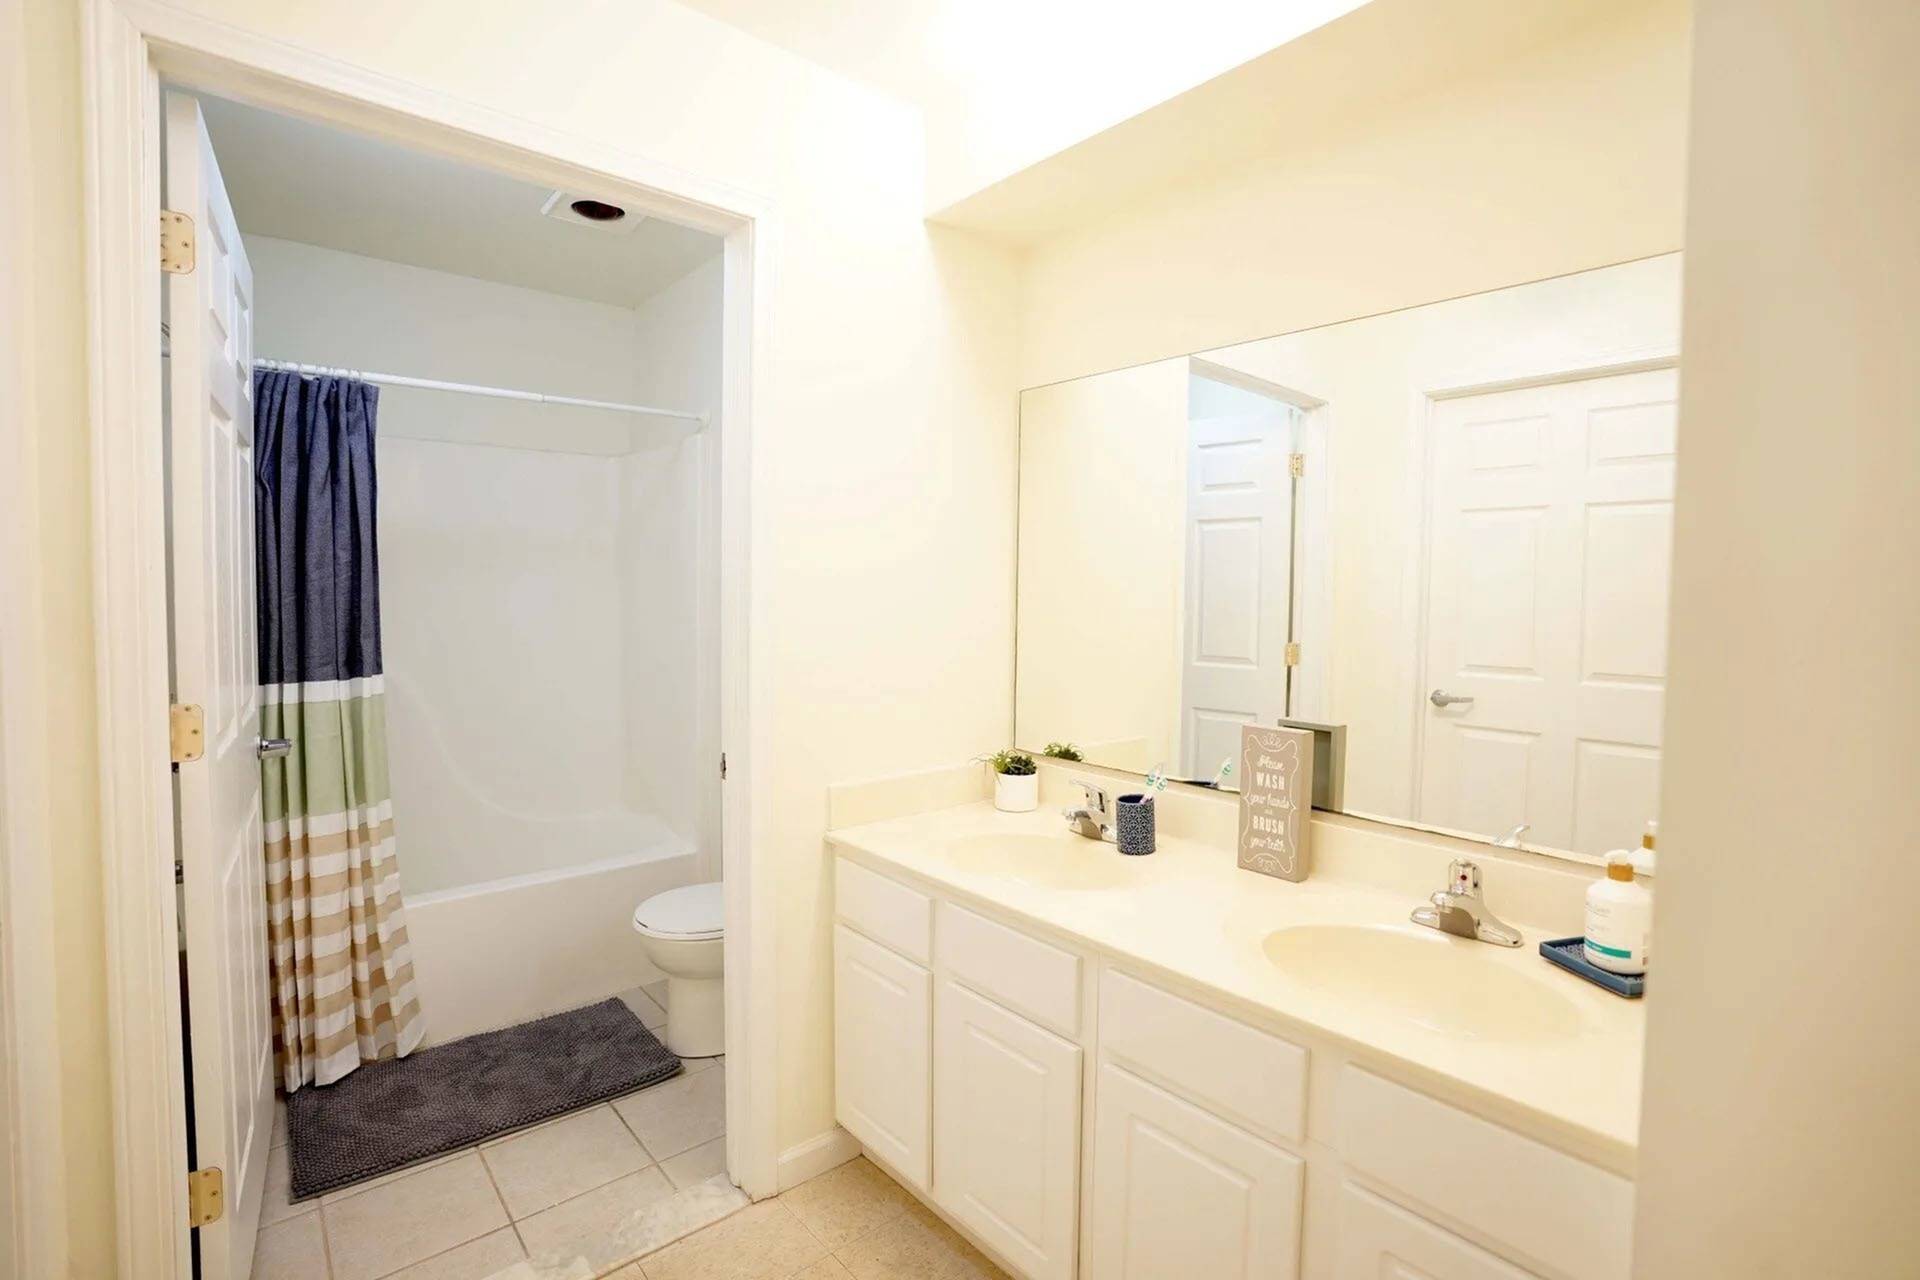 Dog-Friendly Apartments In Mansfield, PA - Commons At Mansfield - Bathroom With White Cabinets, Large Vanity Mirror, Dual Sinks, And A Shower, Tub Combo.